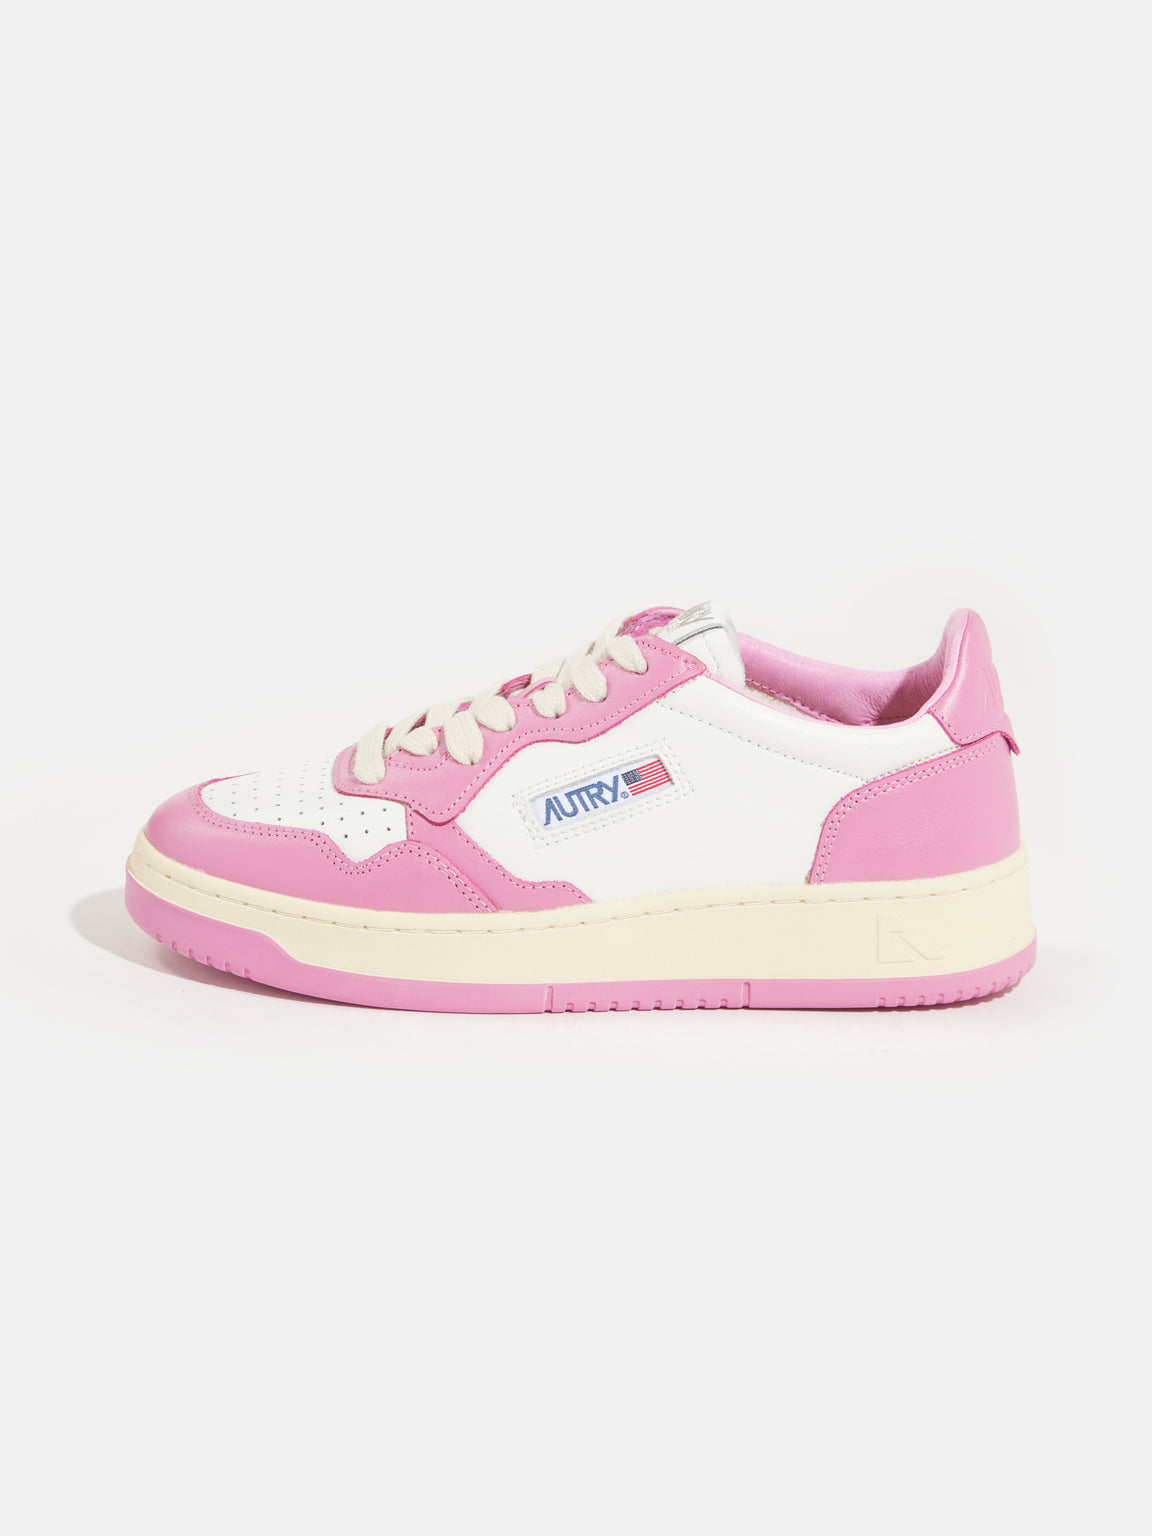 AUTRY | MEDALIST LOW FOR WOMEN PINK